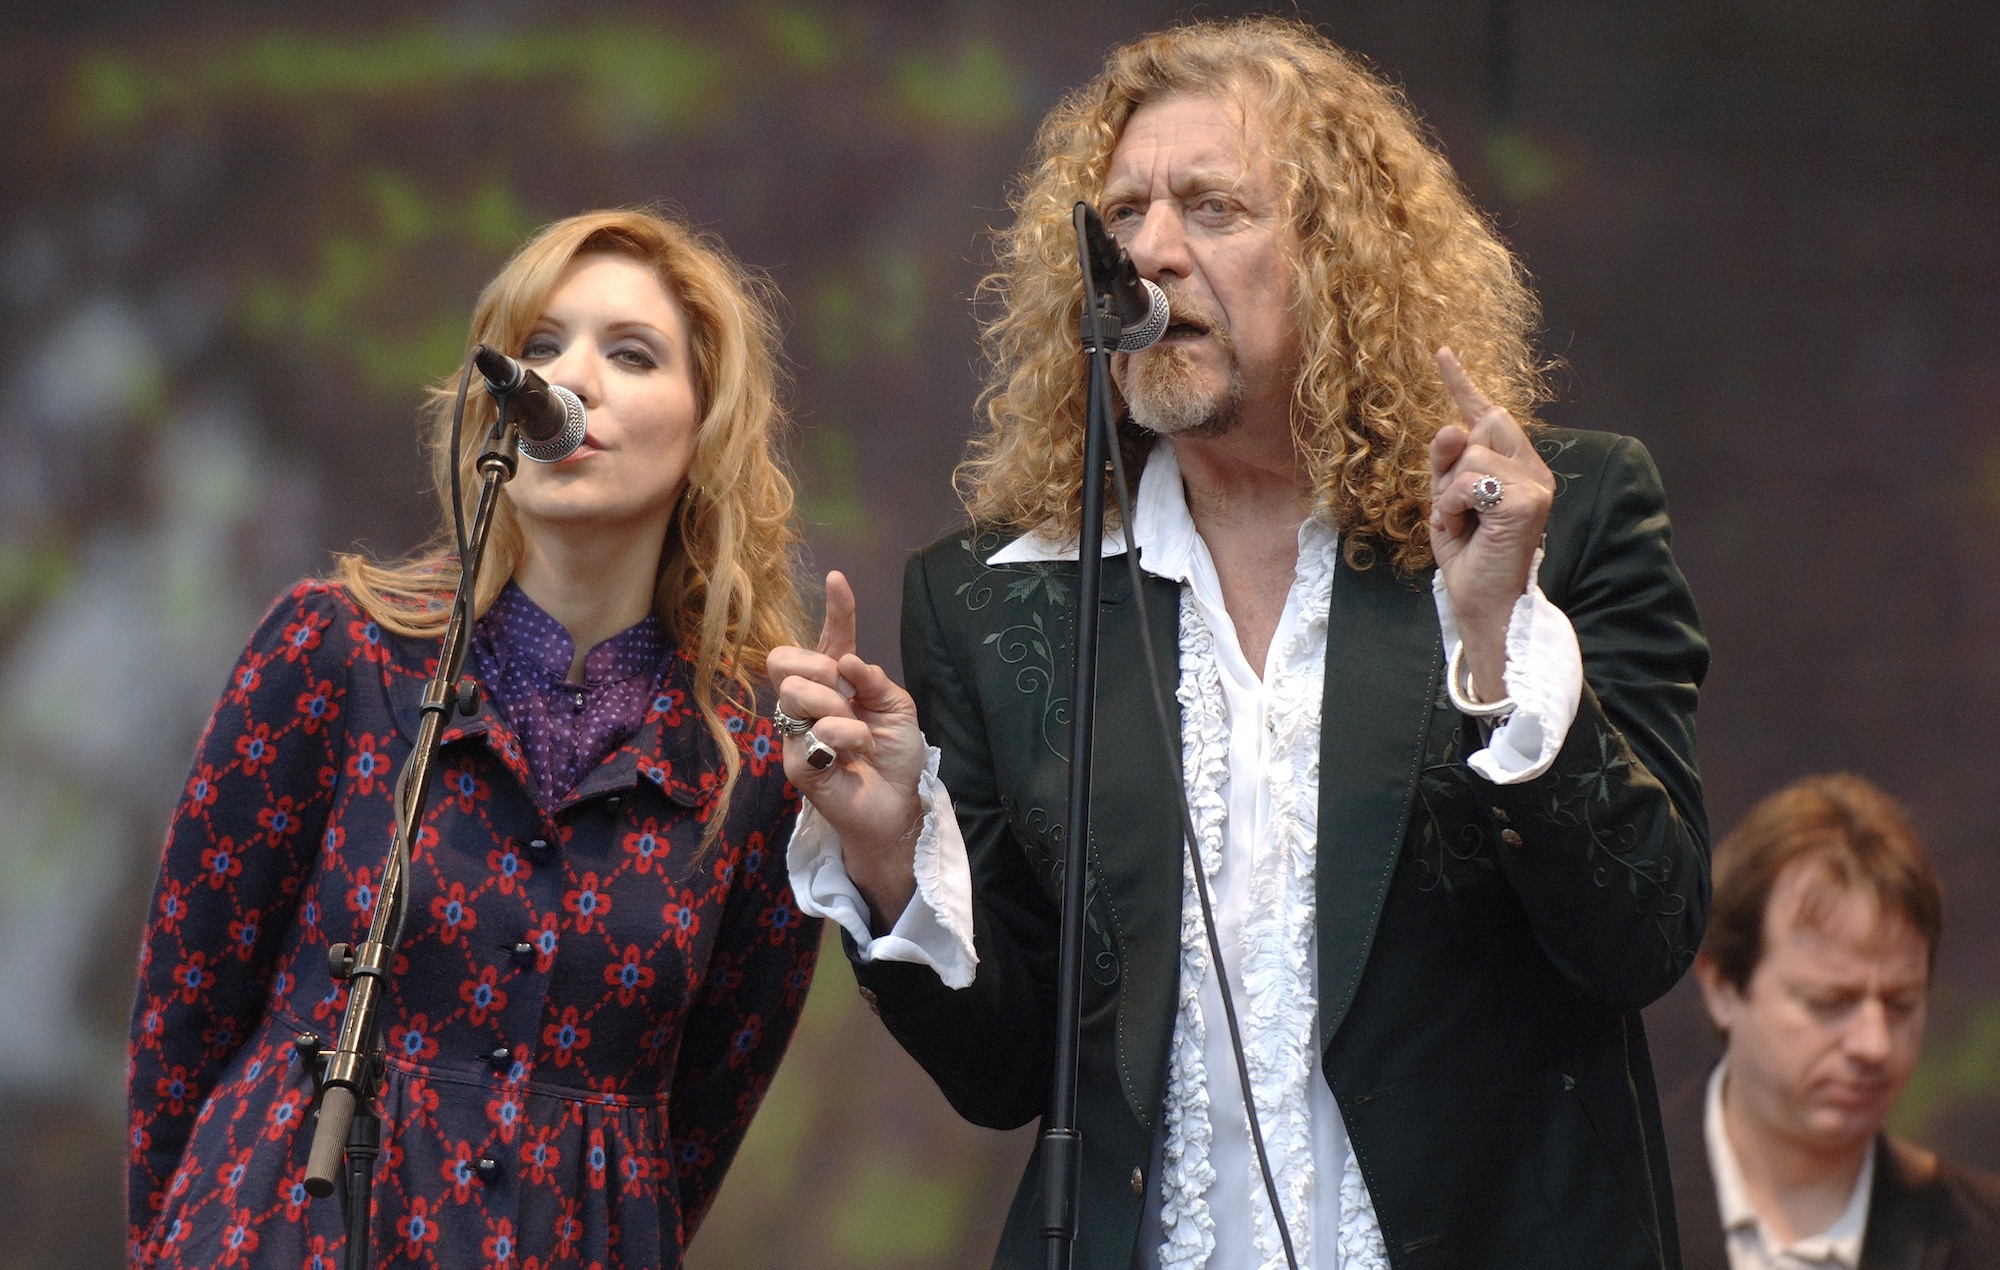 Robert Plant says heritage bands are hanging onto a life raft&#157 2000x1270